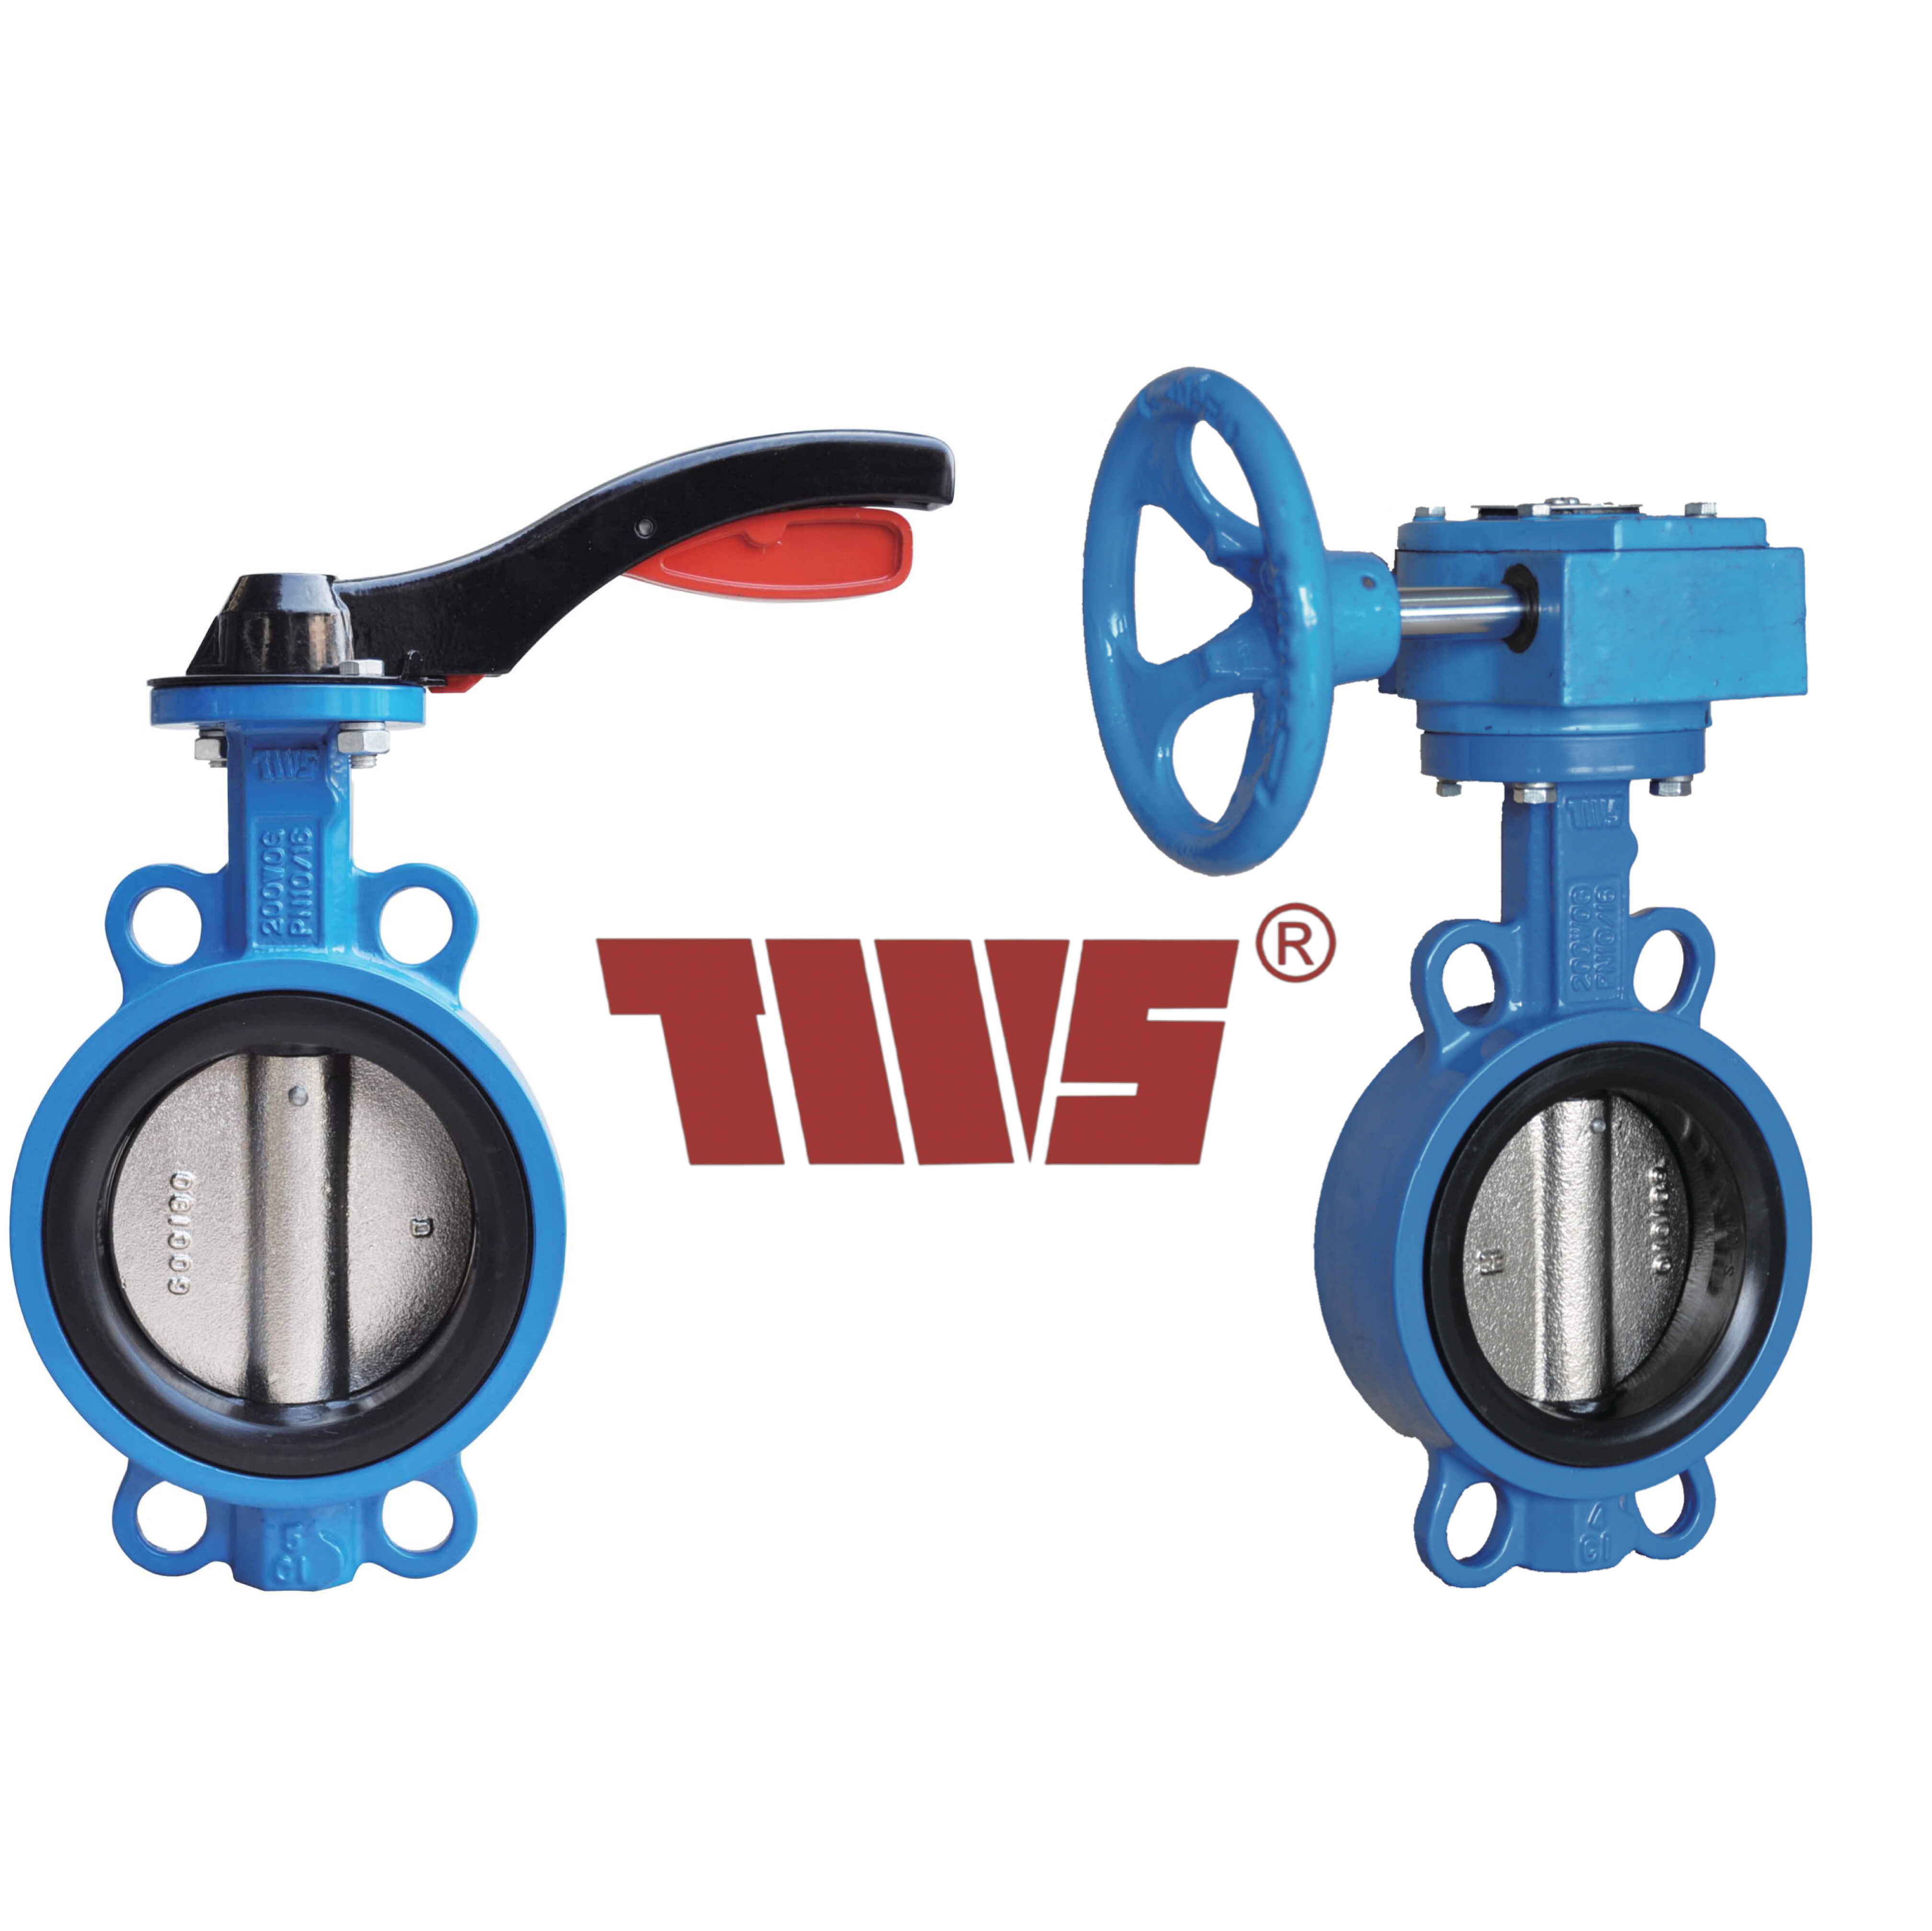 What is the difference between handle lever butterfly valve and worm gear butterfly valve? How should choose?